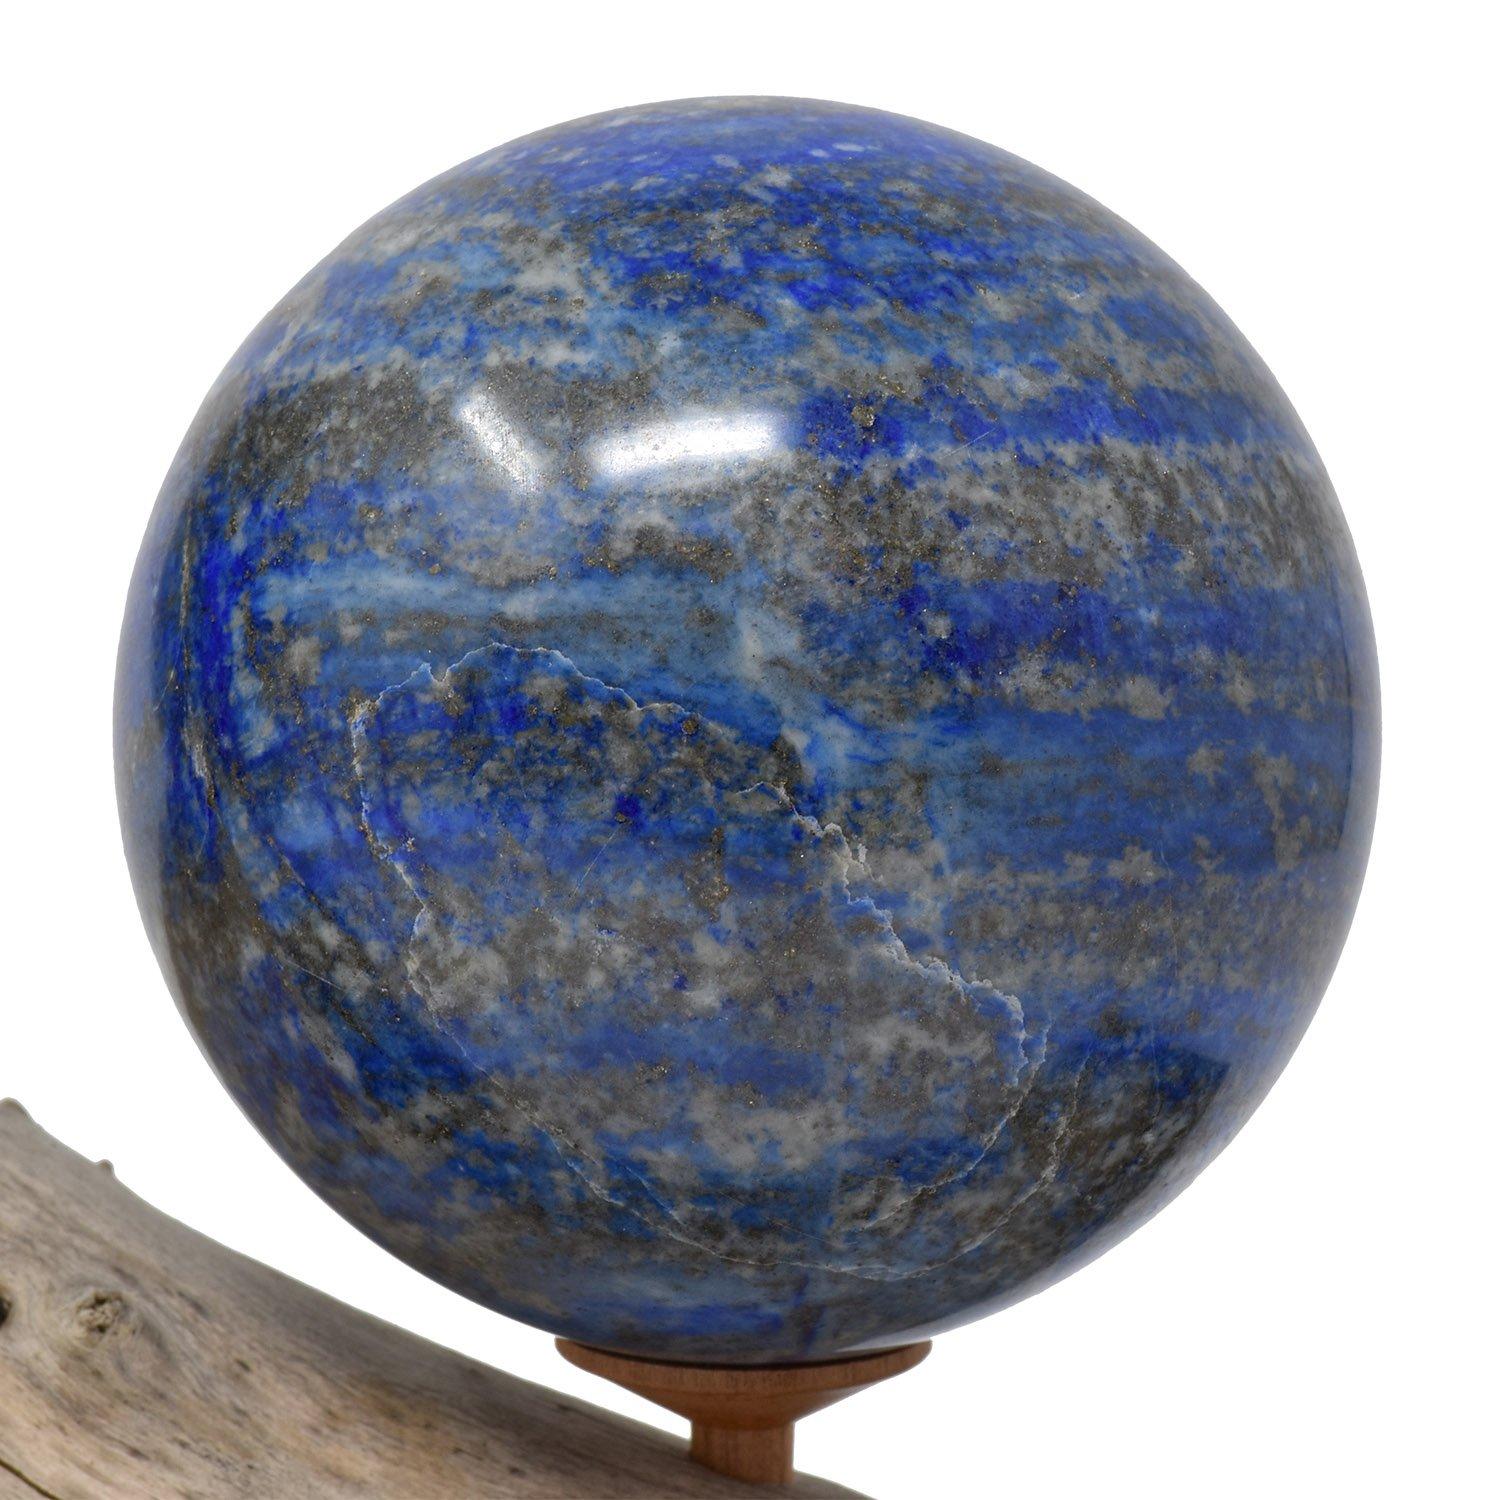 Lapis Lazuli Three Mineral Spheres Mounted on an Organic Wood Branch